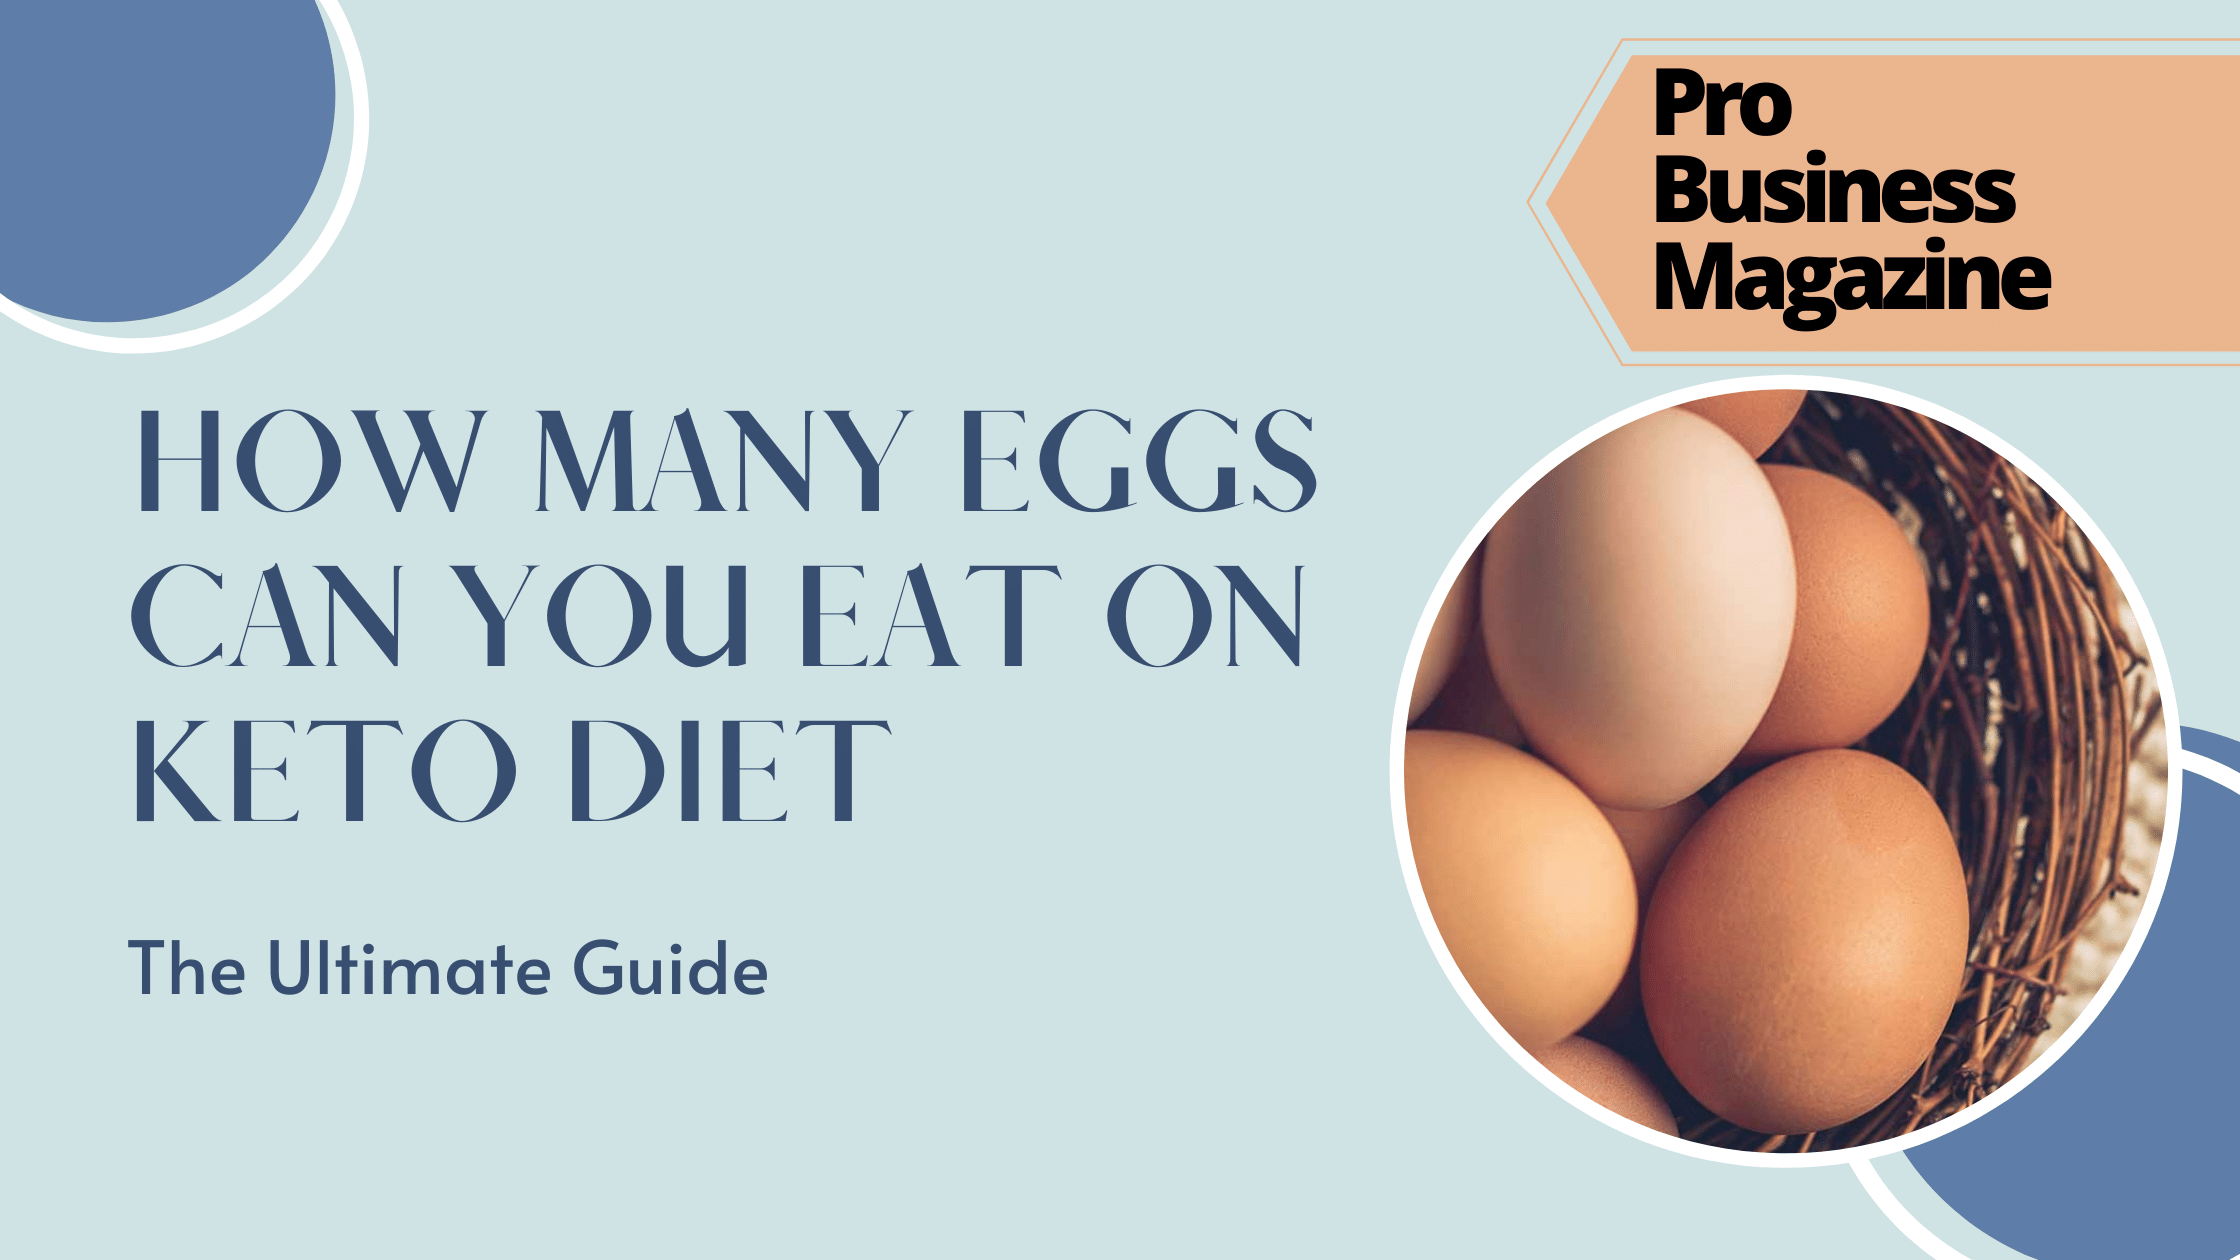 How Many Eggs Can You Eat on Keto Diet